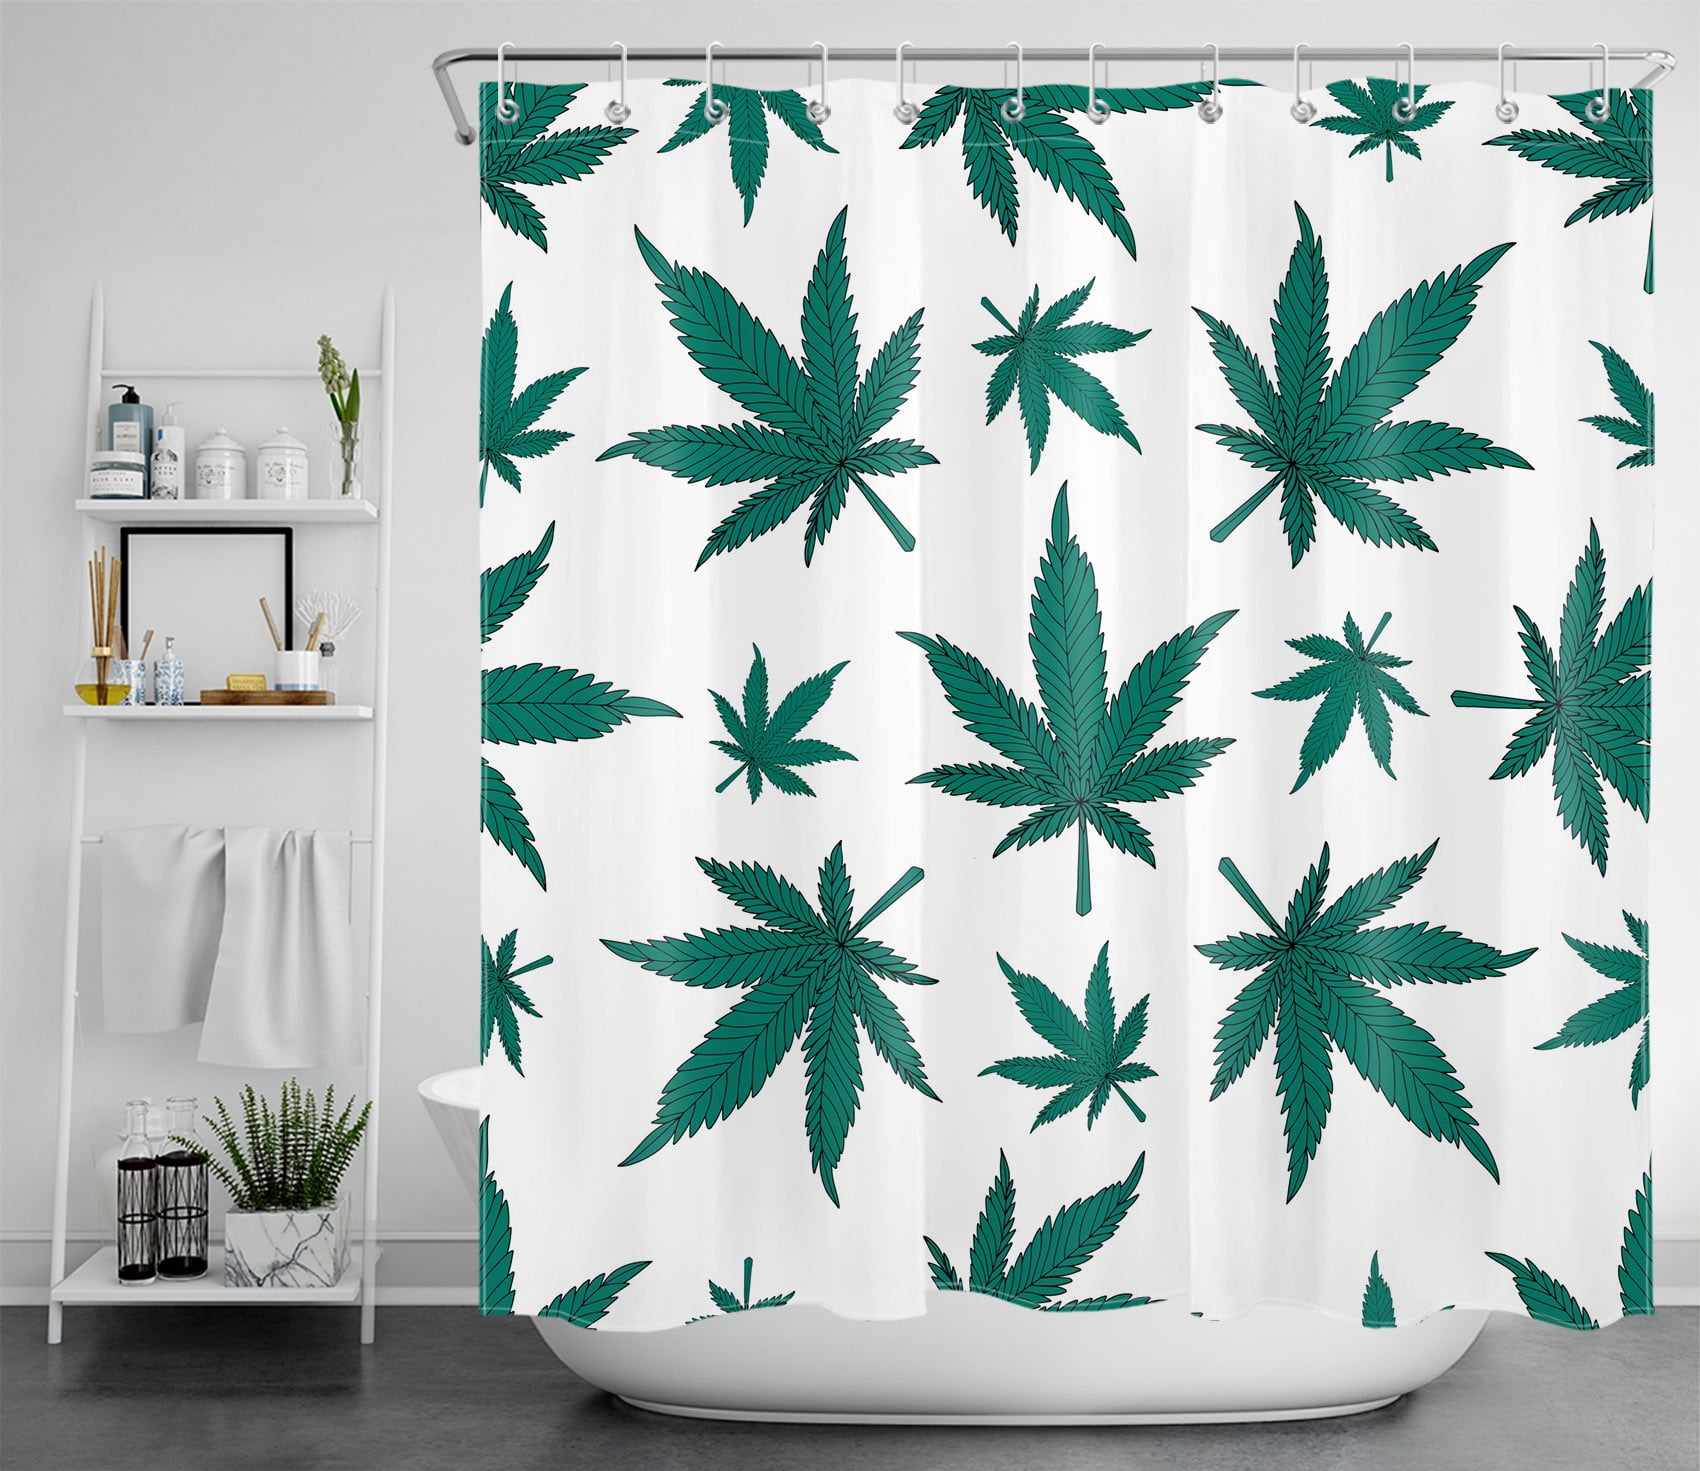 Marihuana Leaves Shower Curtain Liner Hooks Waterproof Bathroom Decor 72 Inches 